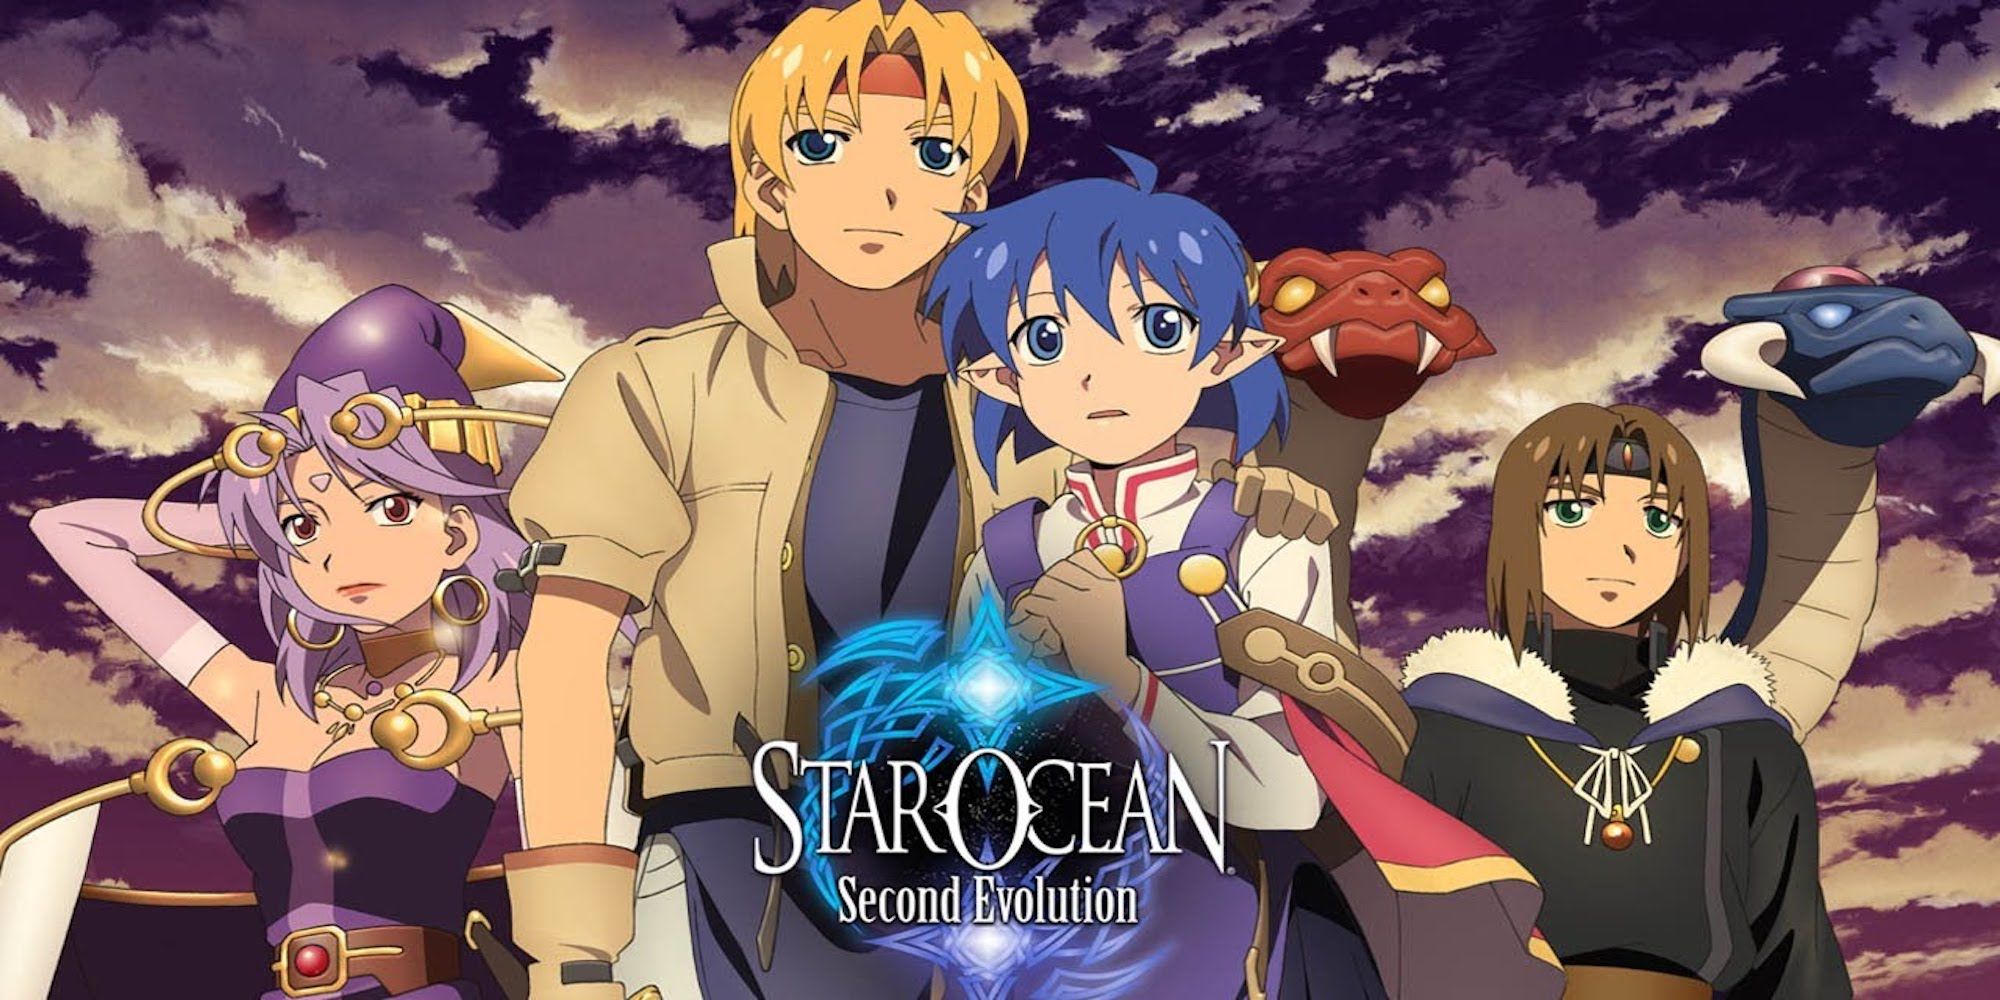 Promo art featuring characters in Star Ocean Second Evolution